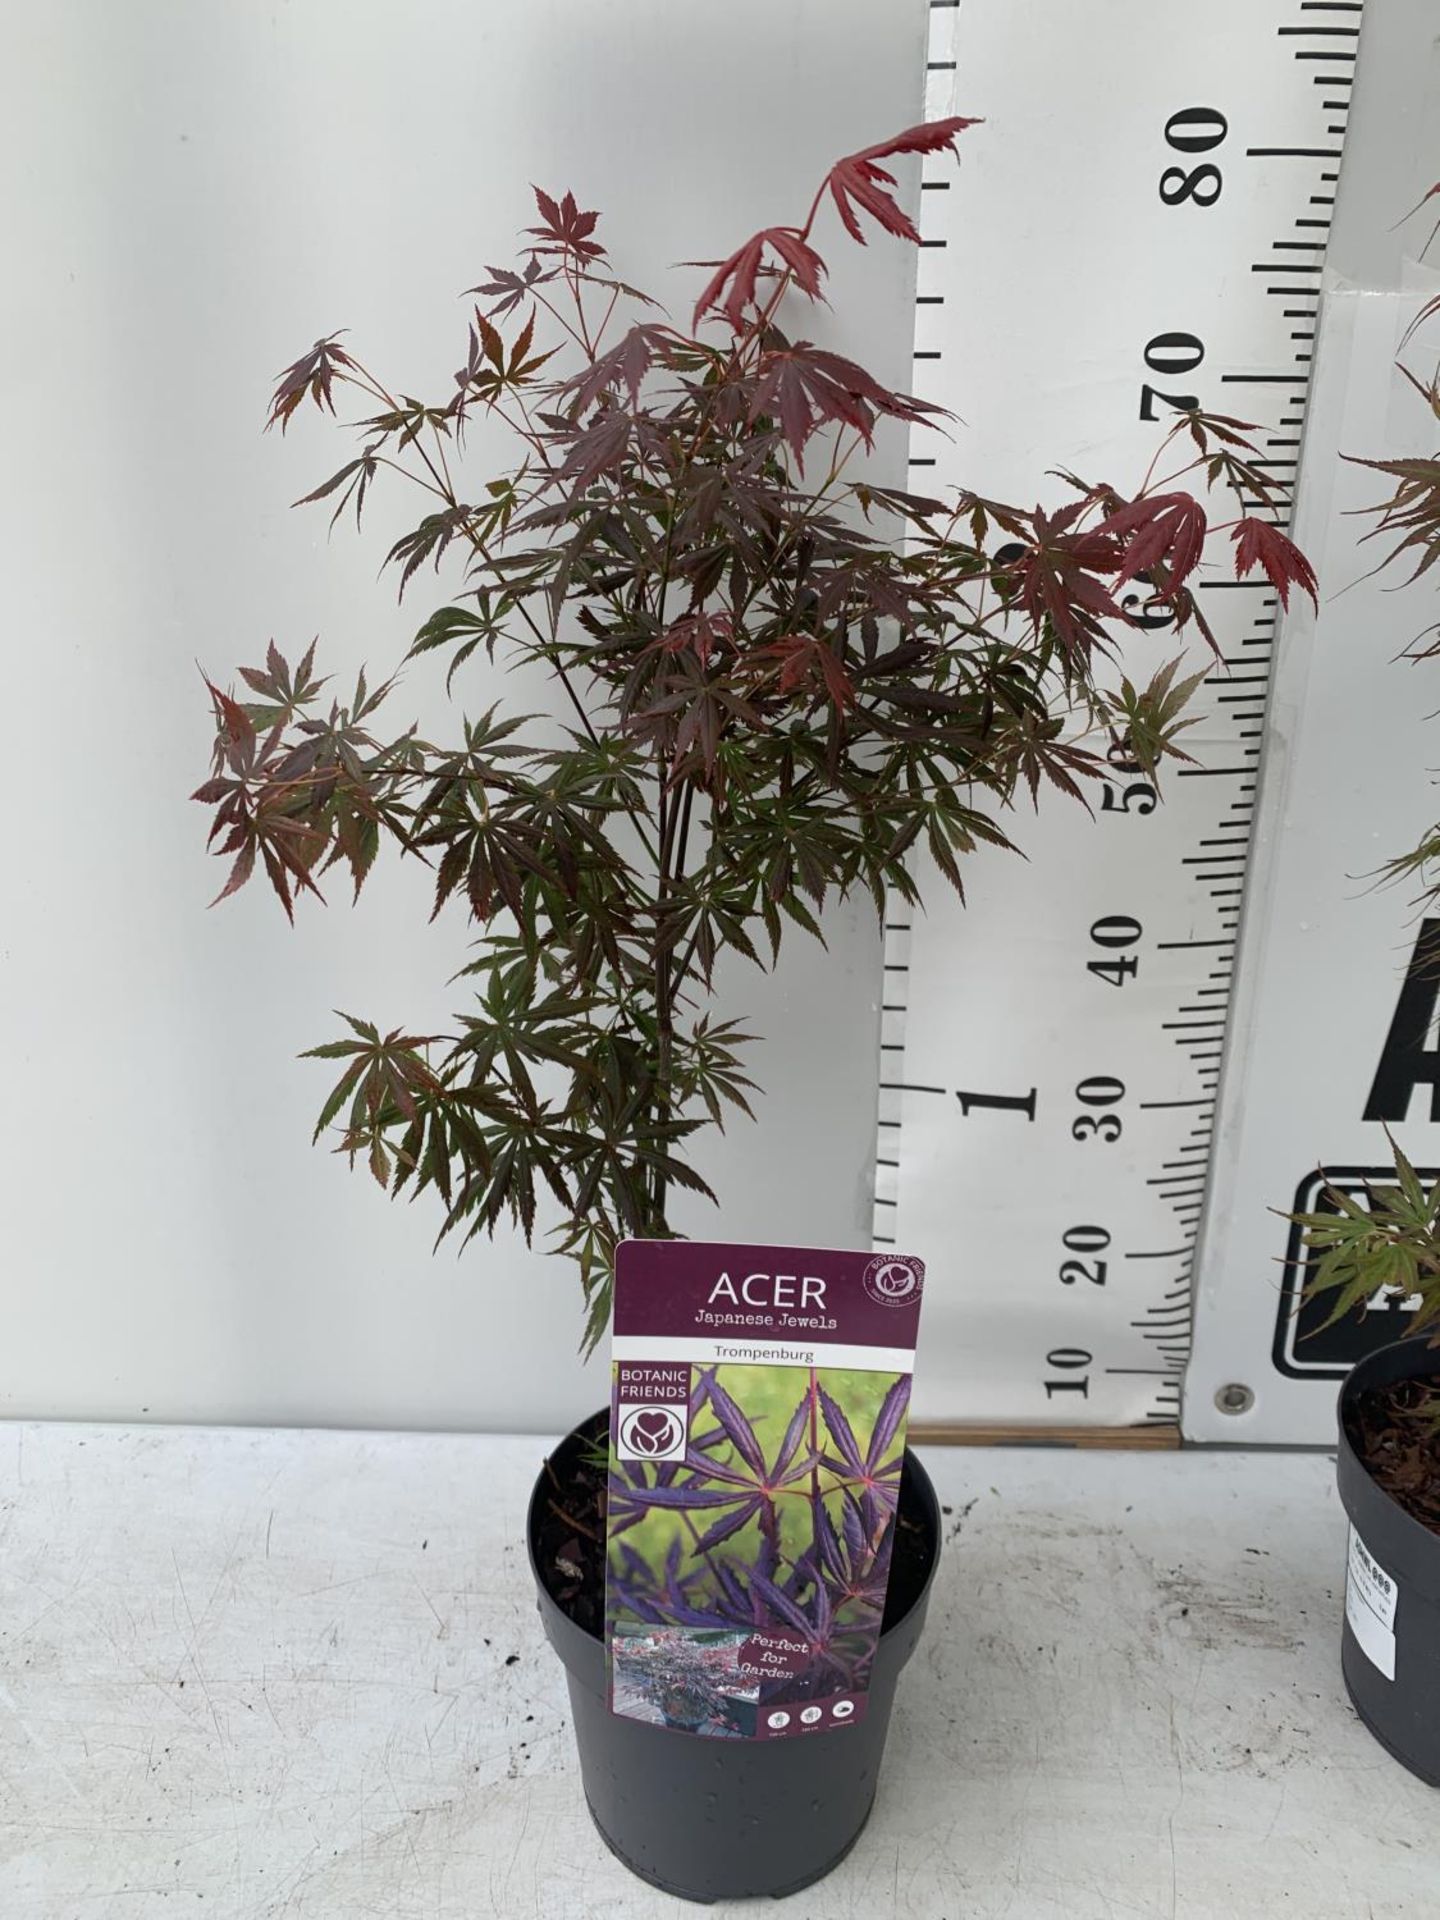 TWO ACER PALMATUM JAPANESE JEWELS IN 3 LTR POTS TO INCLUDE A TROMPENBURG AND A SHAINA 70 -80CM - Image 2 of 8